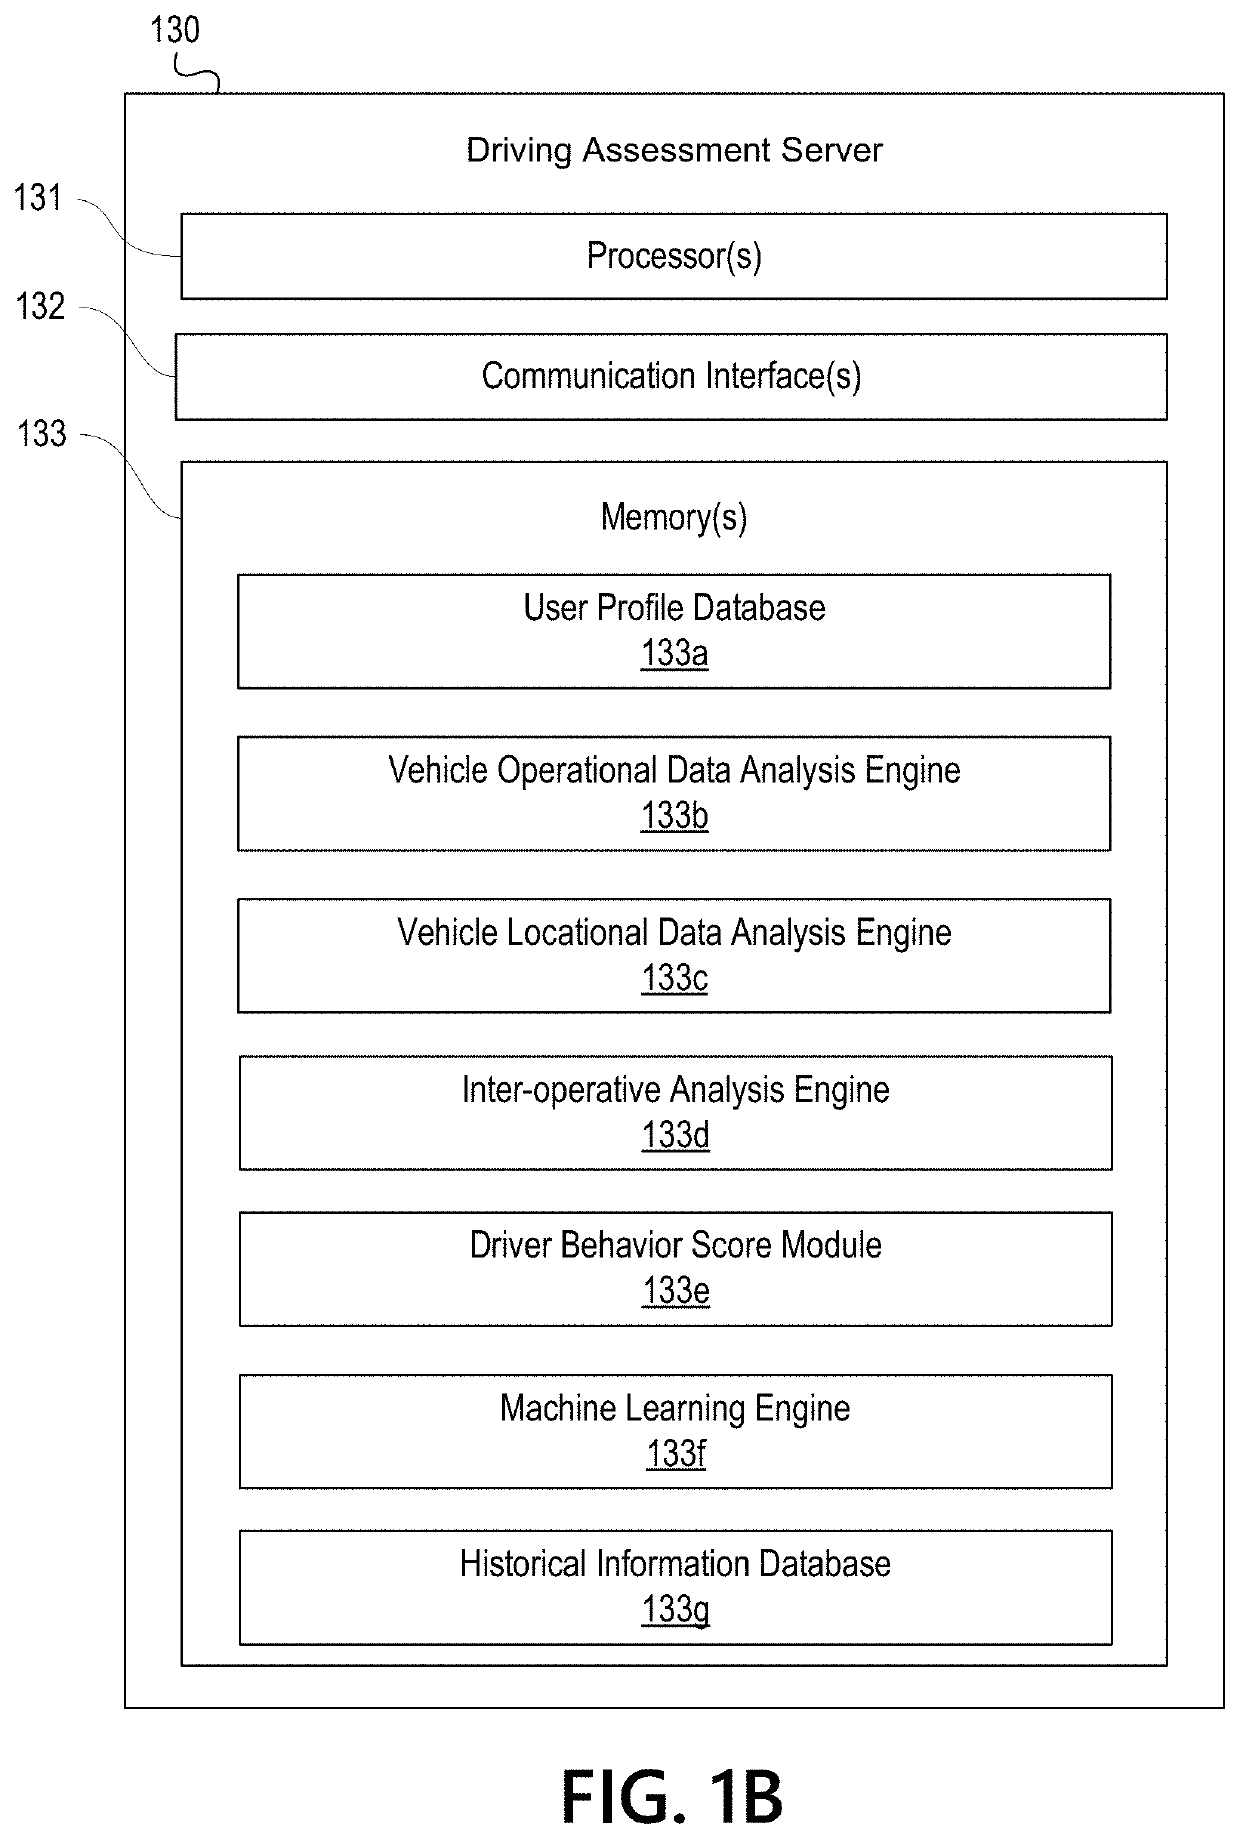 Vehicle telematics based driving assessment